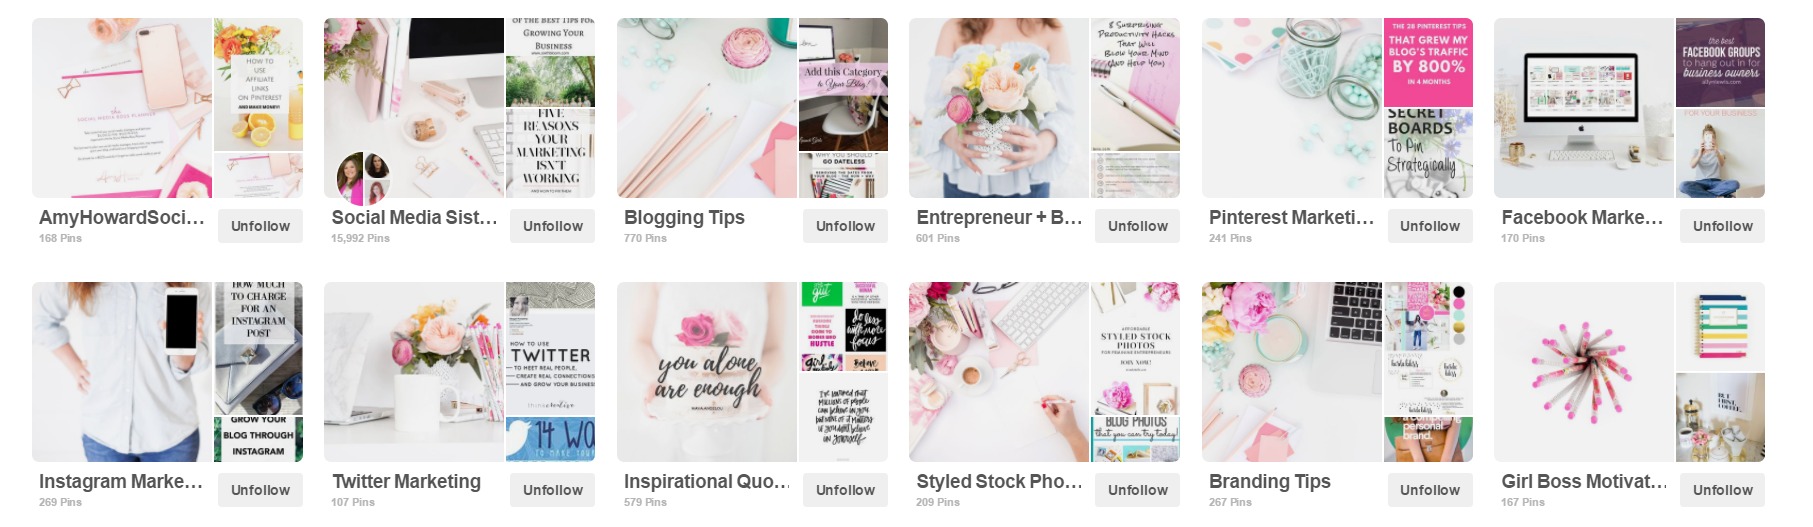 Find out how to update your Pinterest Board Covers with Stock Photography with these tips from Pinterest and social media strategist, Amy Howard Social!